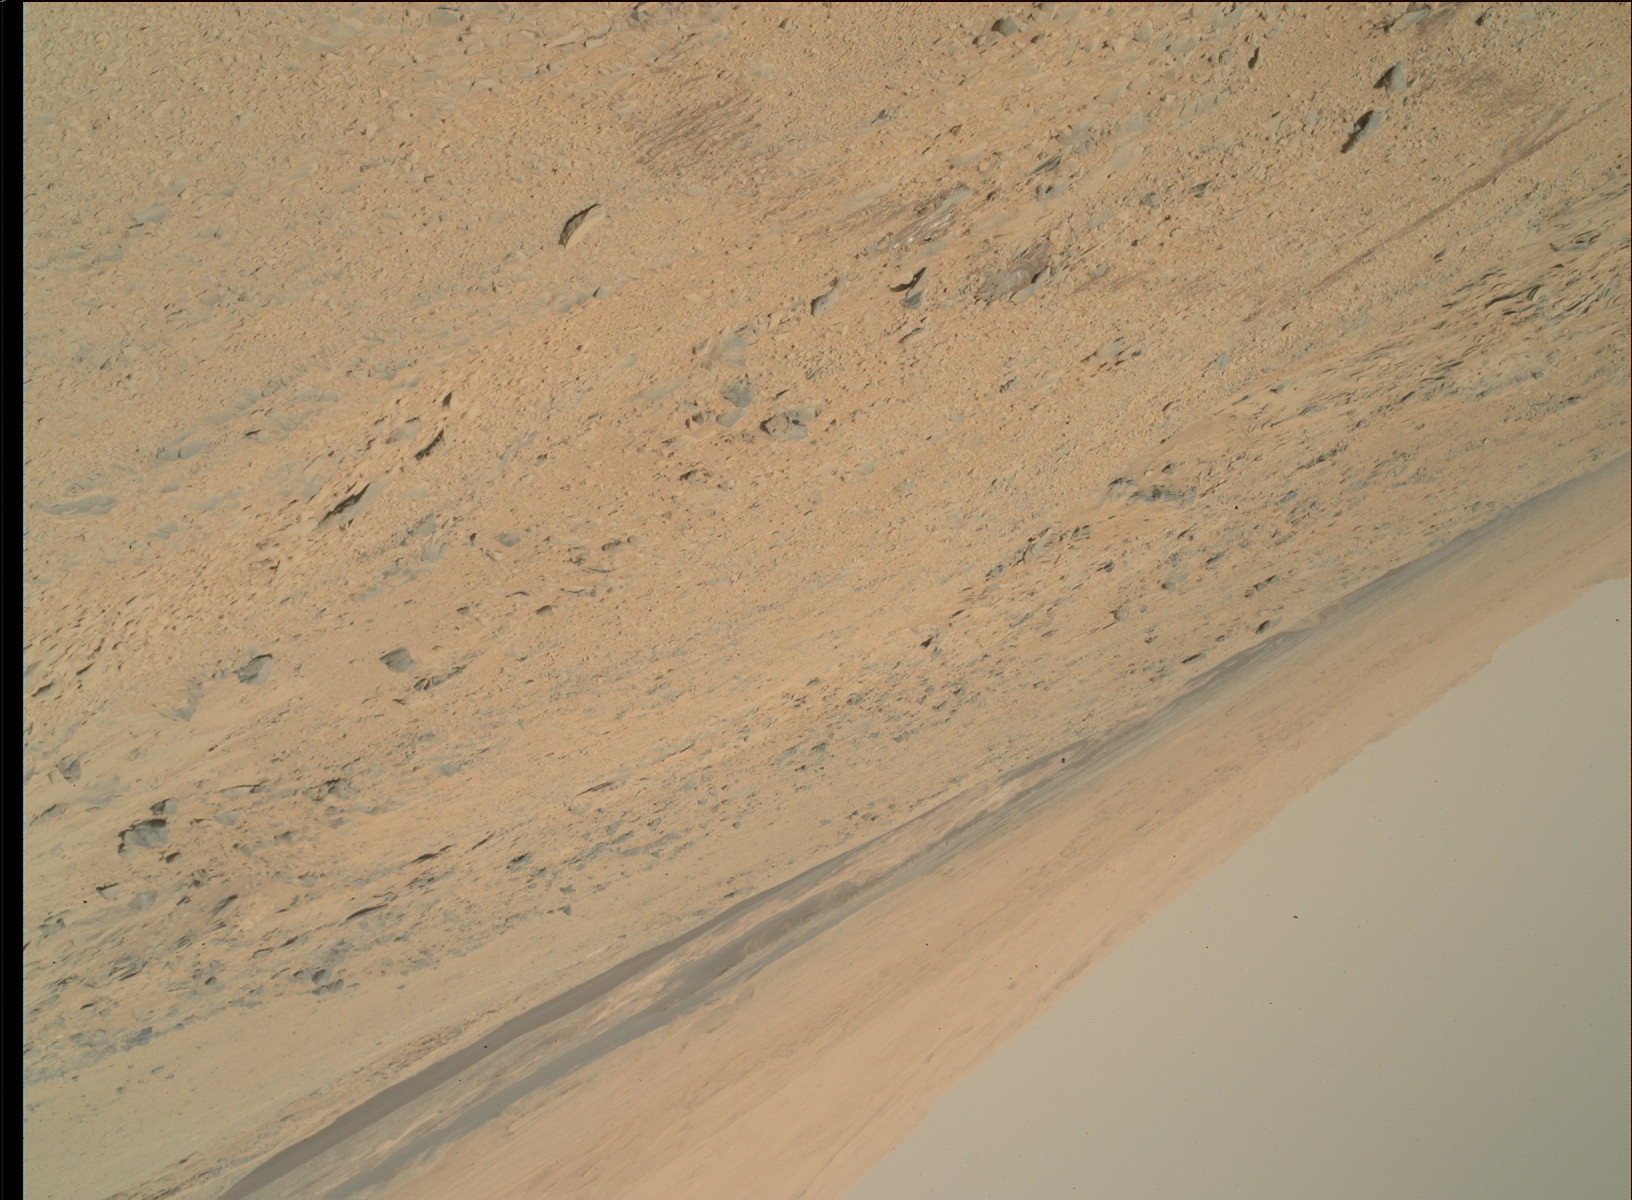 Nasa's Mars rover Curiosity acquired this image using its Mars Hand Lens Imager (MAHLI) on Sol 453